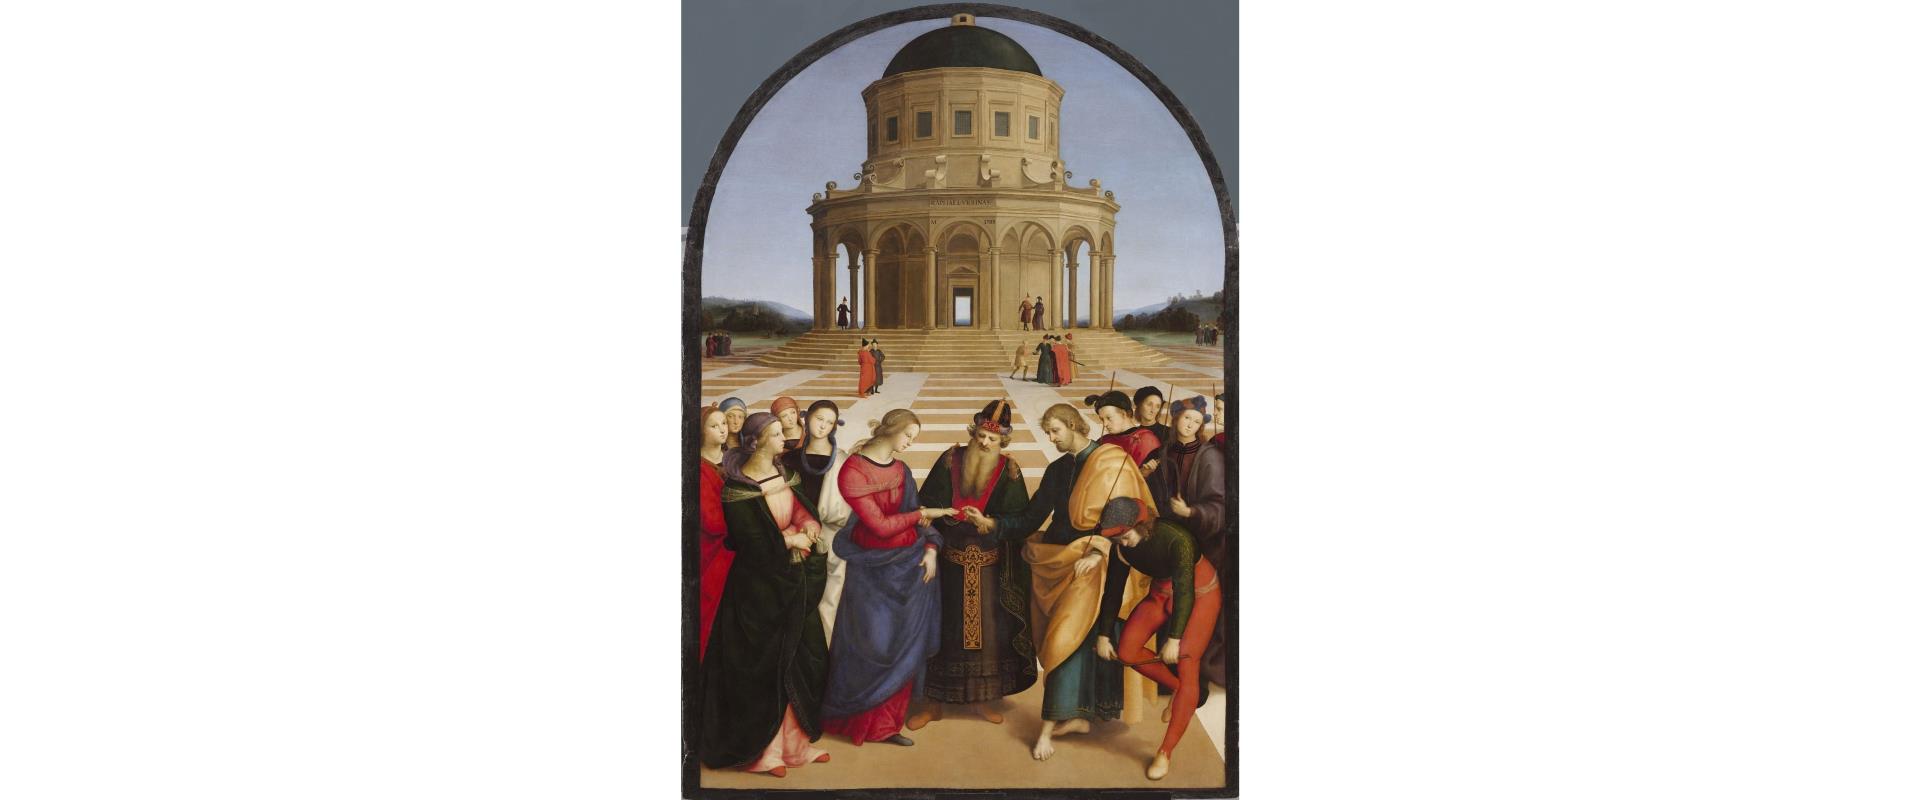 Kept at the Pinacoteca di Brera in Milan, this masterpiece by the young Raphael marks the stylistic maturity of the artist compared to the master Perugino. Stay at the Best Western Hotel City, in the heart of the city and discover the wonders of Milan.